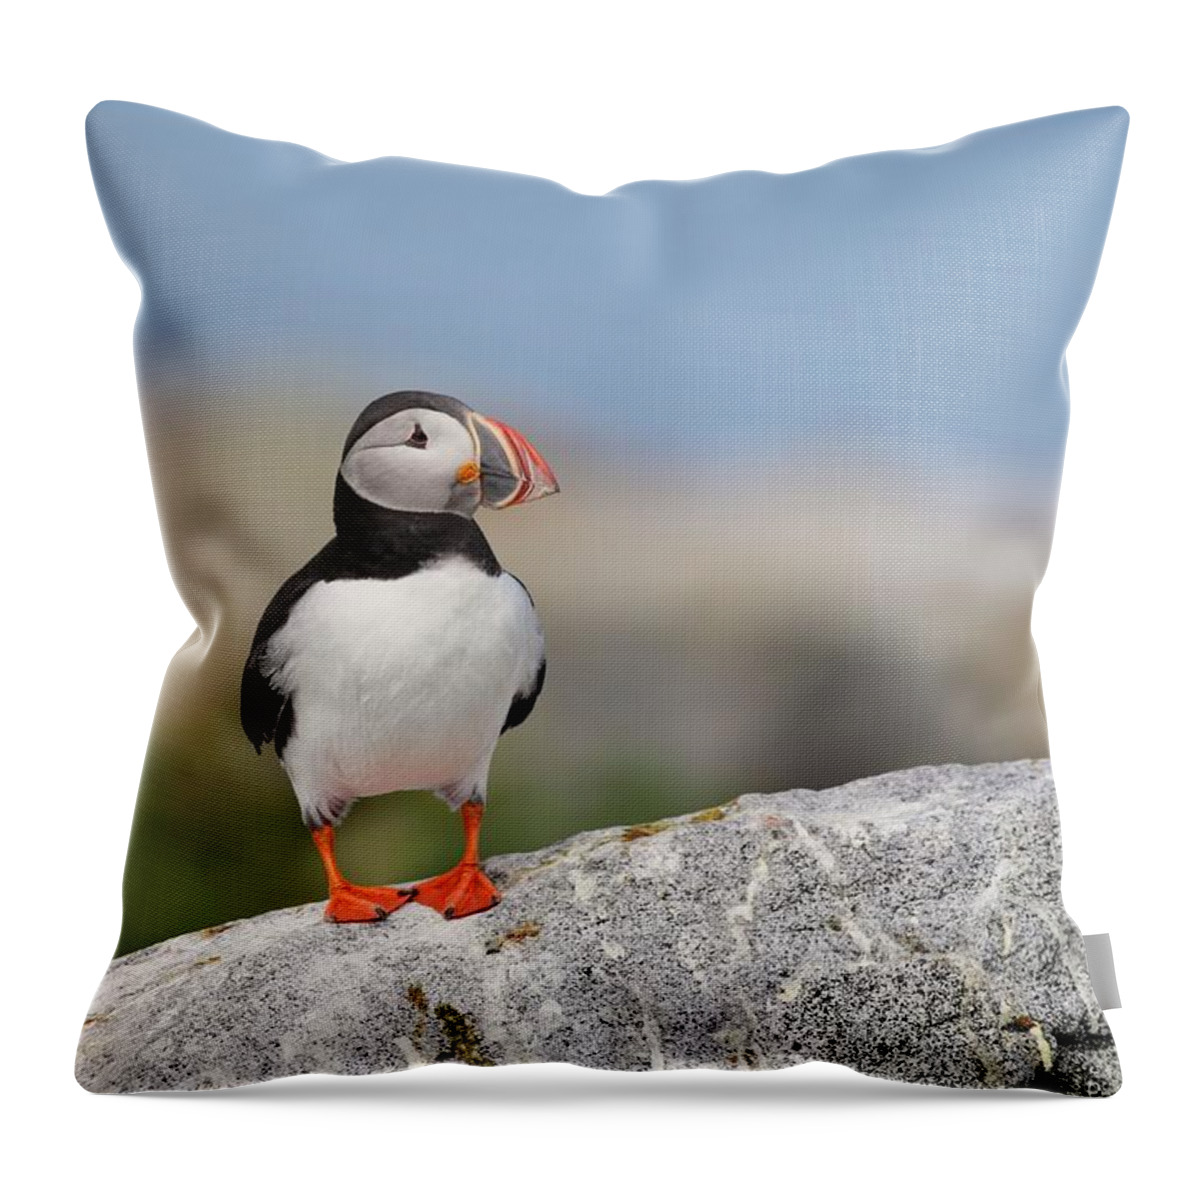 Atlantic Throw Pillow featuring the photograph Clowning Around by Daniel Behm